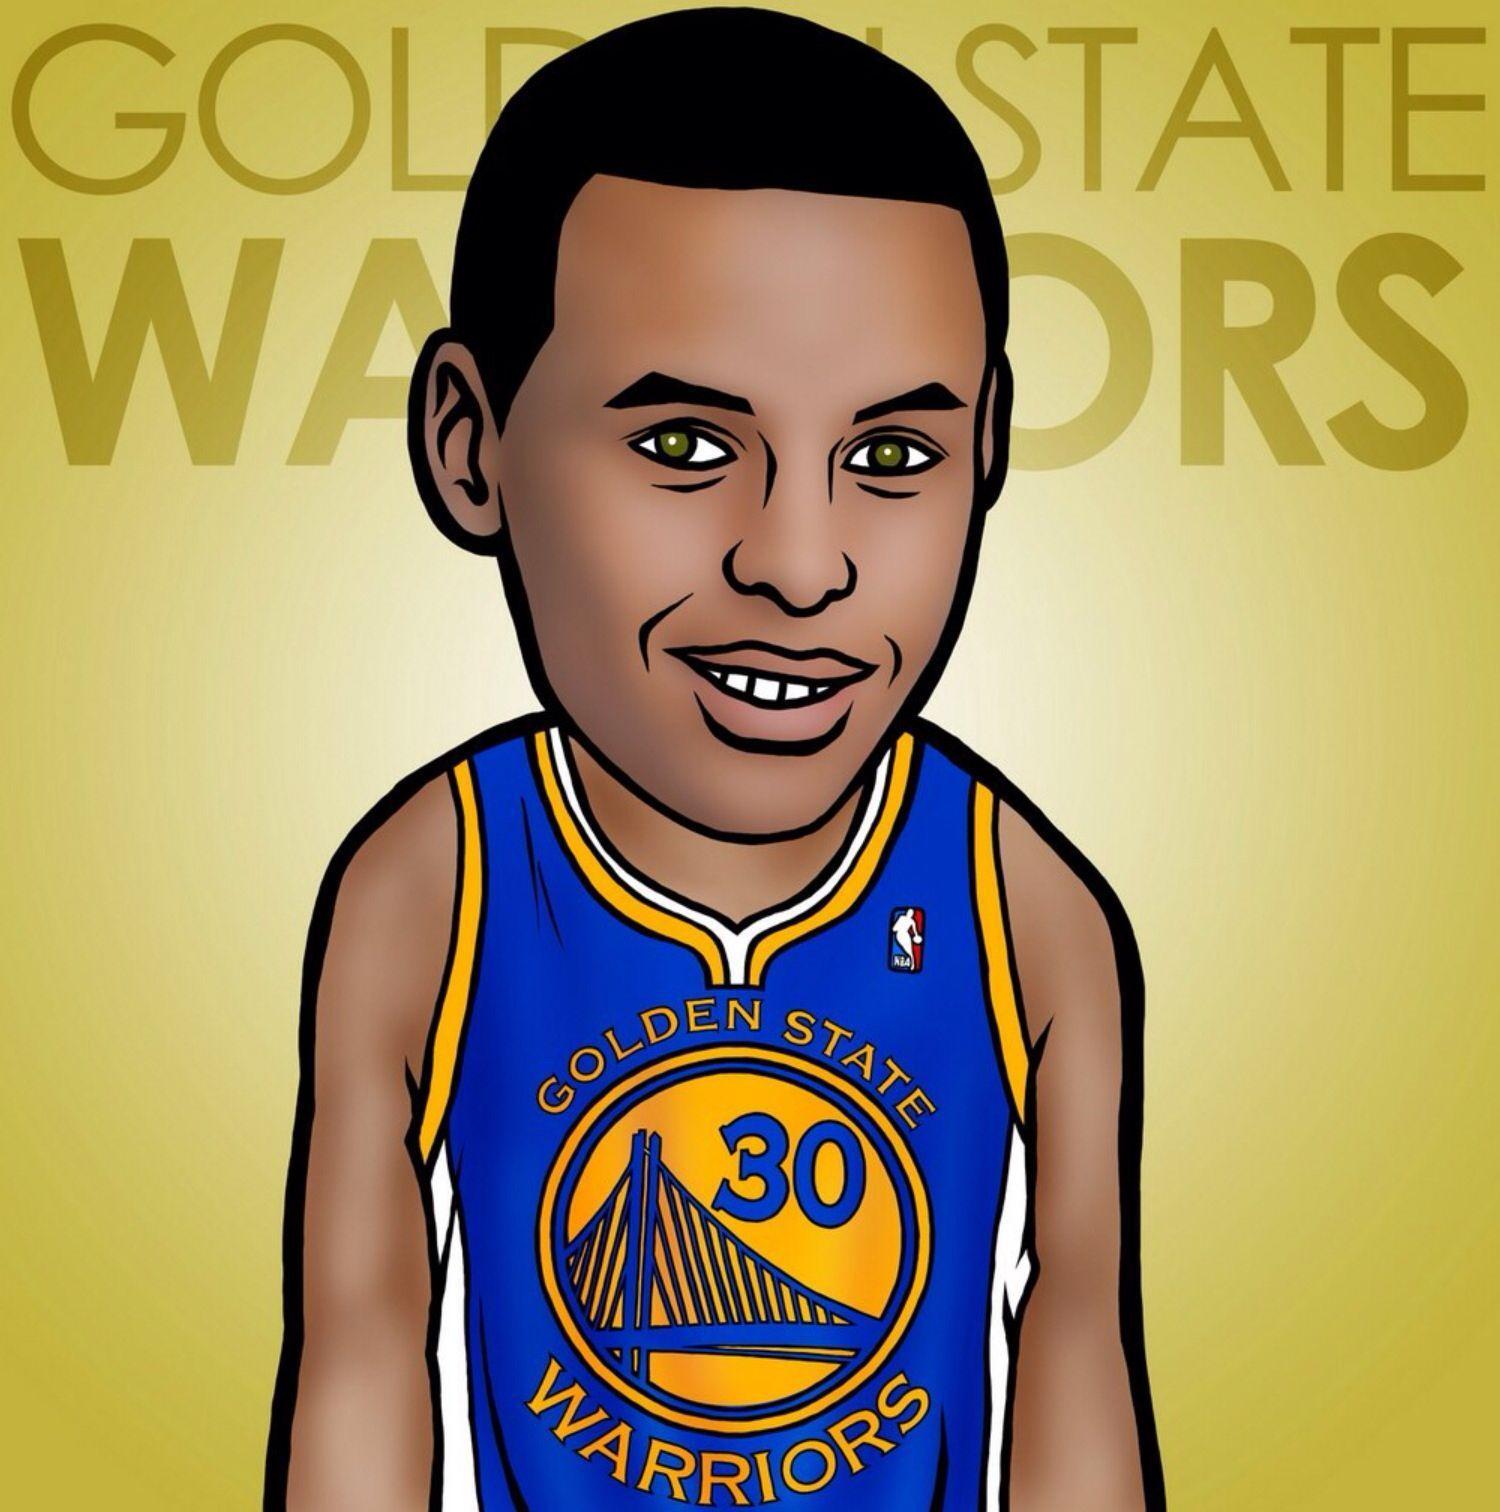 Stephen Curry Rainmaker Illustration  Hooped Up  Stephen curry  basketball Nba stephen curry Nba wallpapers stephen curry